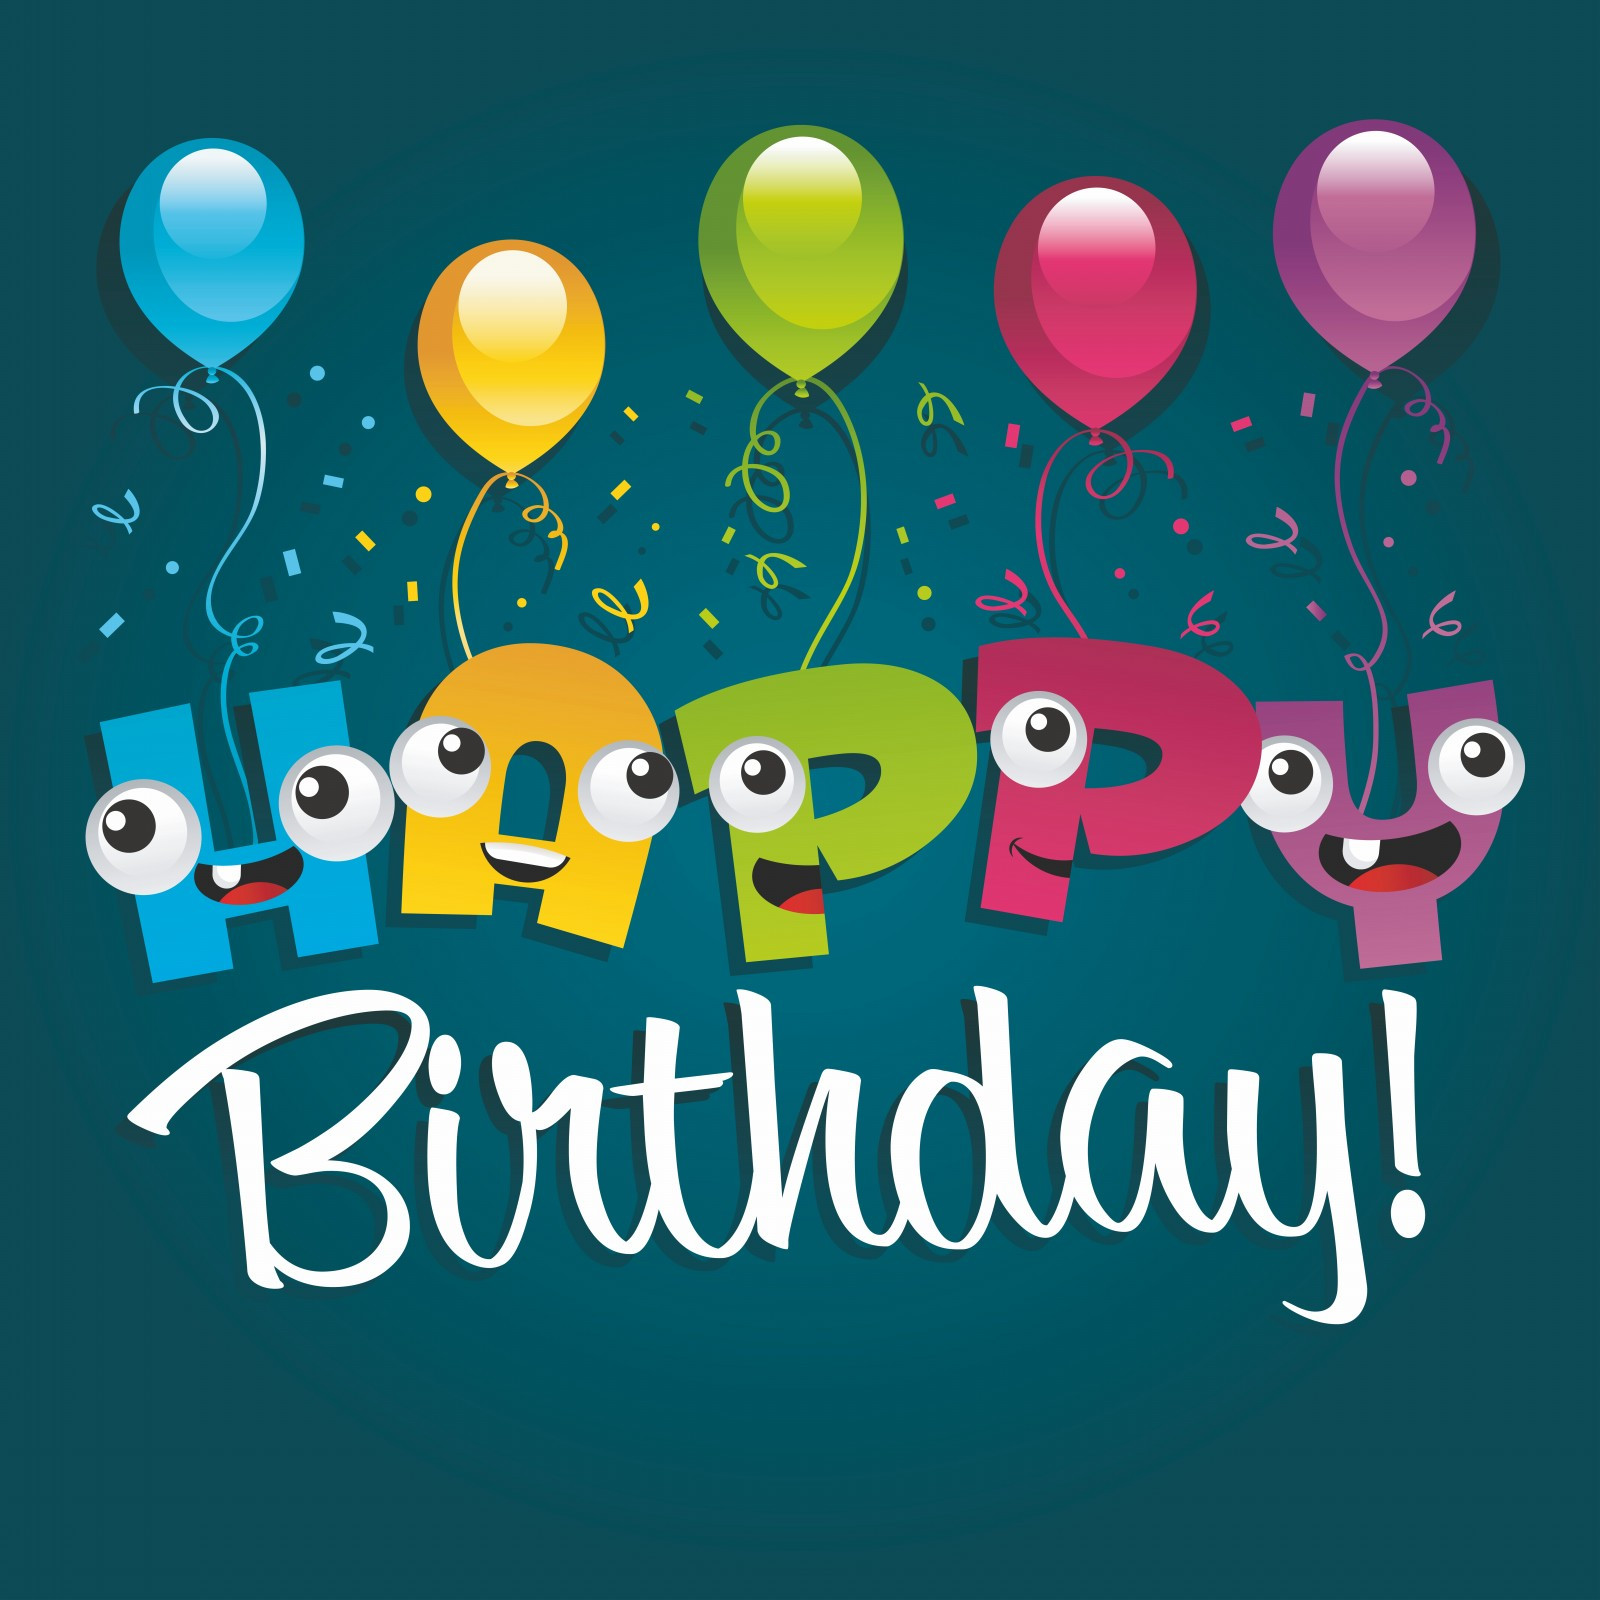 Free Birthday Cards Download
 35 Happy Birthday Cards Free To Download – The WoW Style